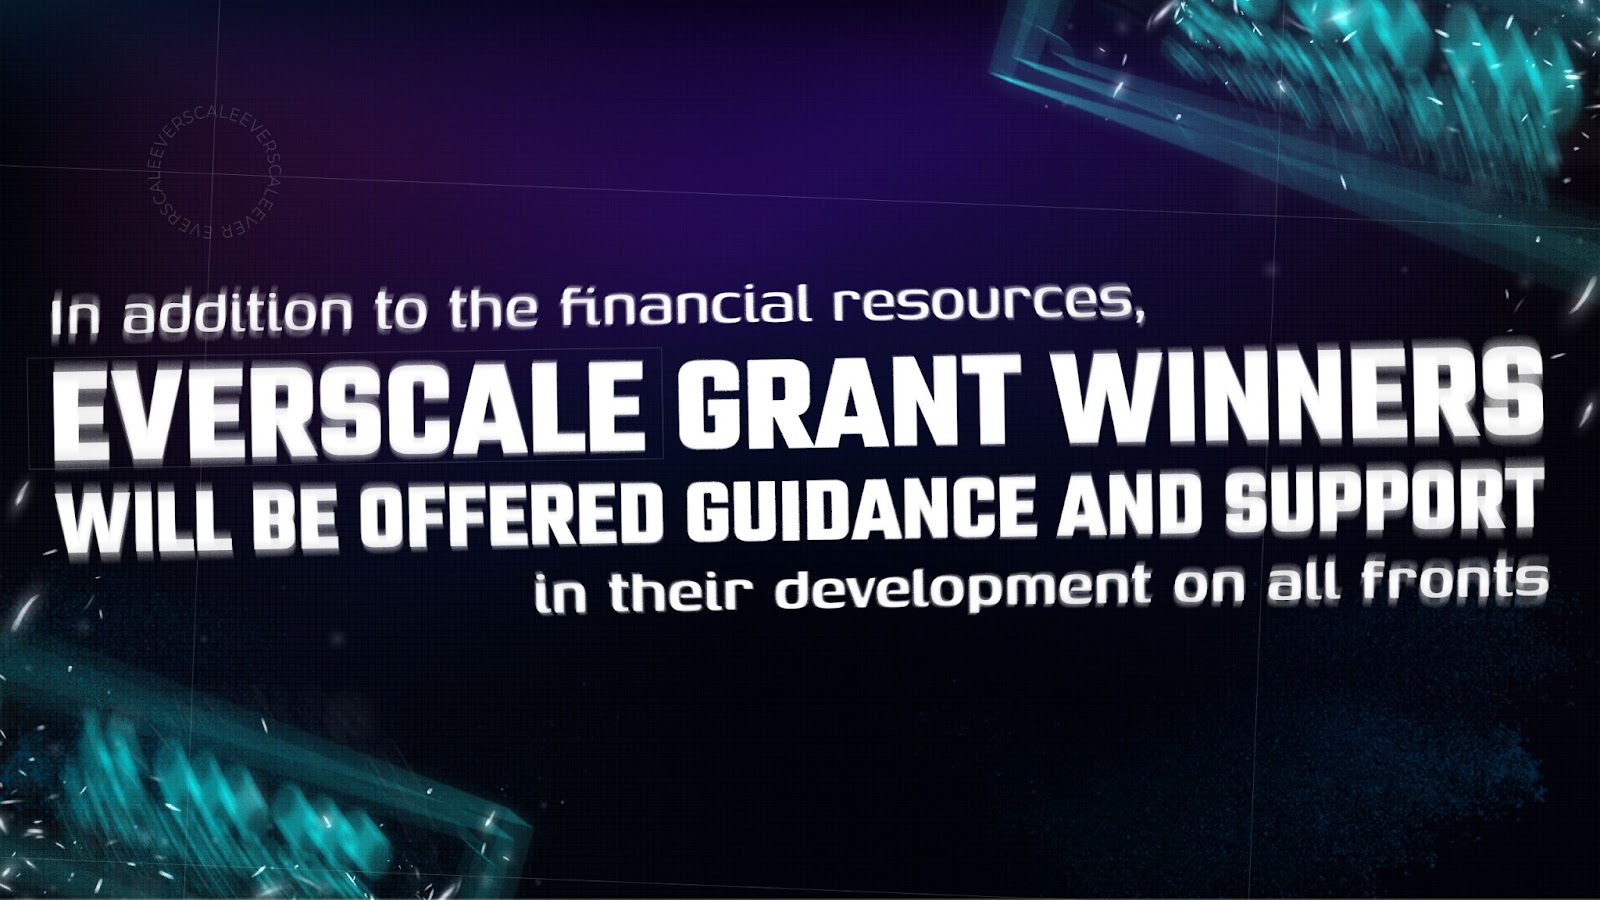 Everscale (Ex FreeTON) Grants Program Now Accepting Applications - Sponsored Bitcoin News